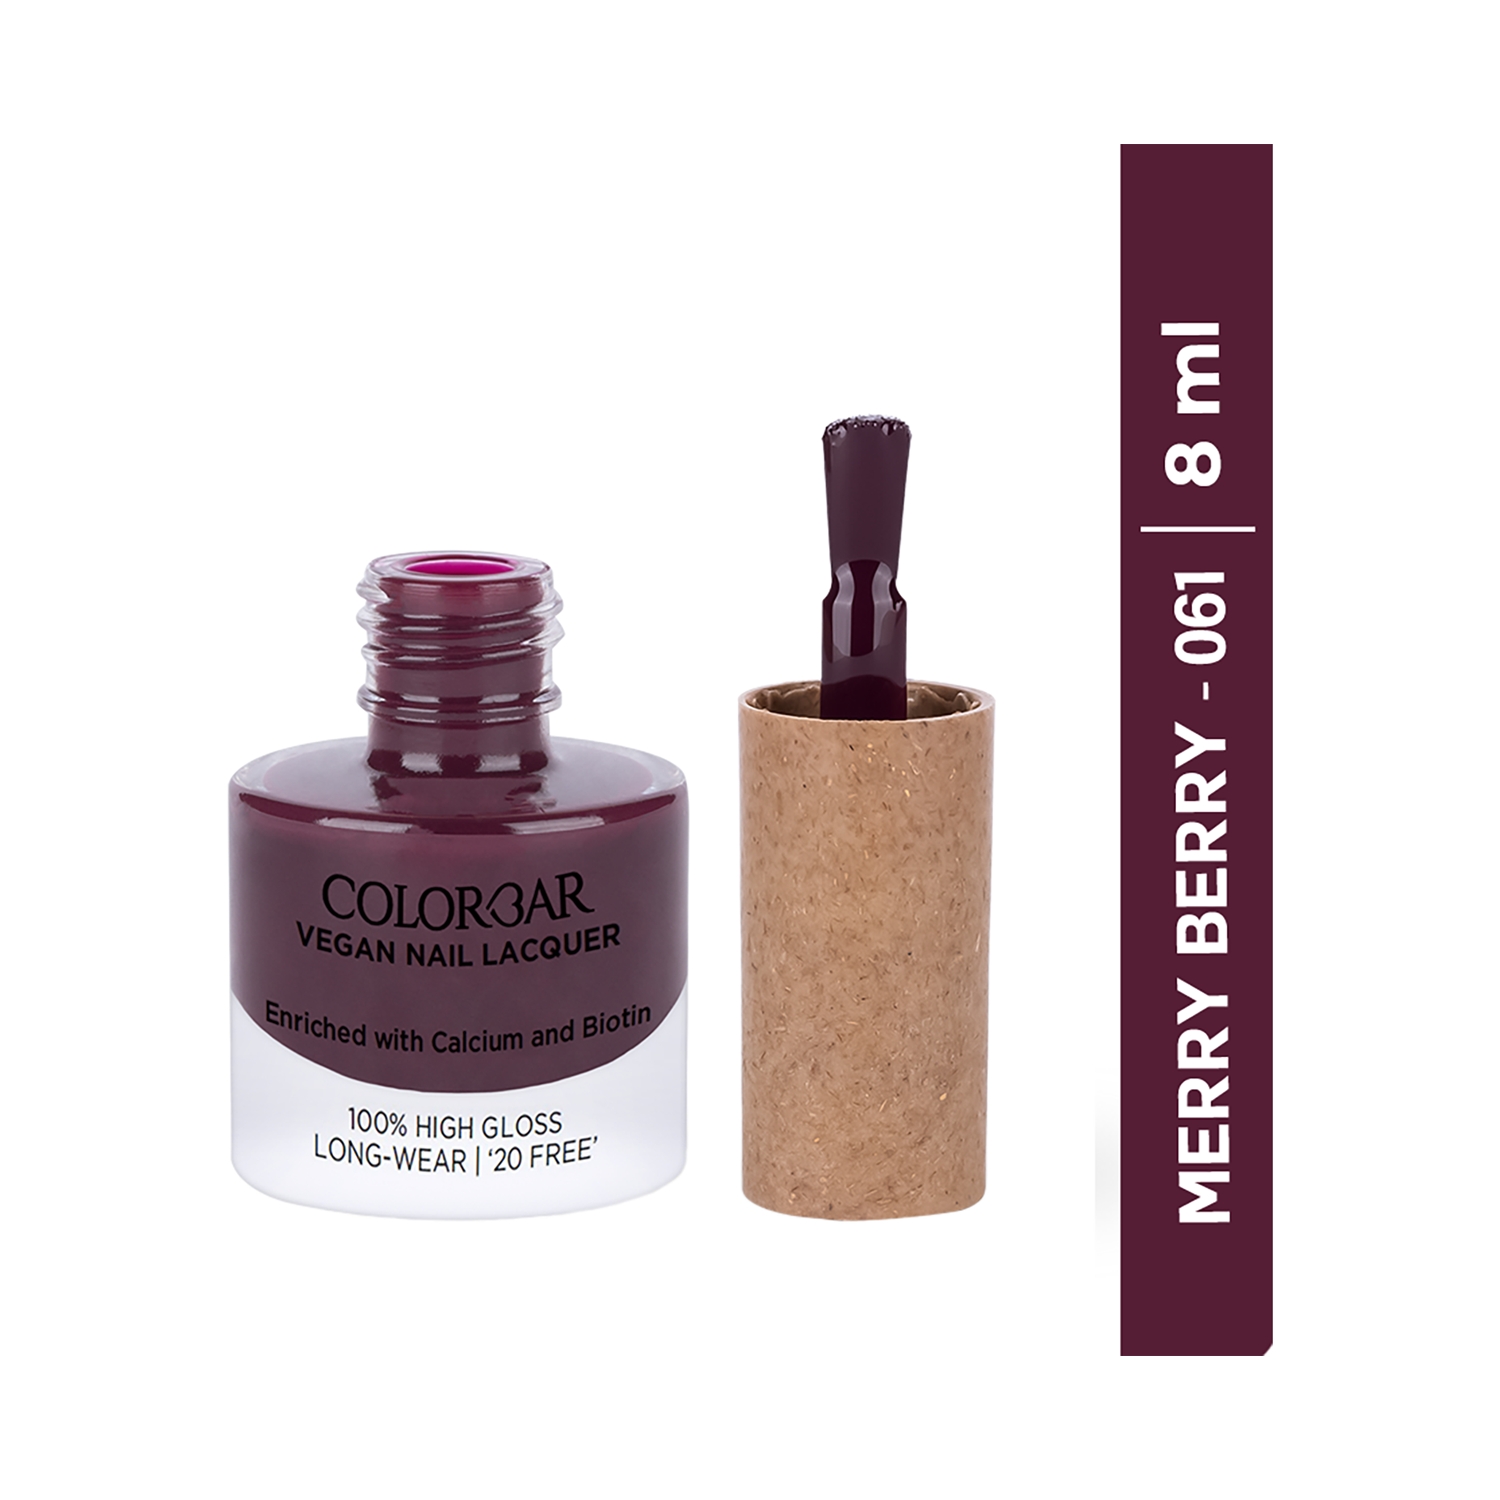 Colorbar Vegan Nail Lacquer - 061 Merry Berry (8ml)